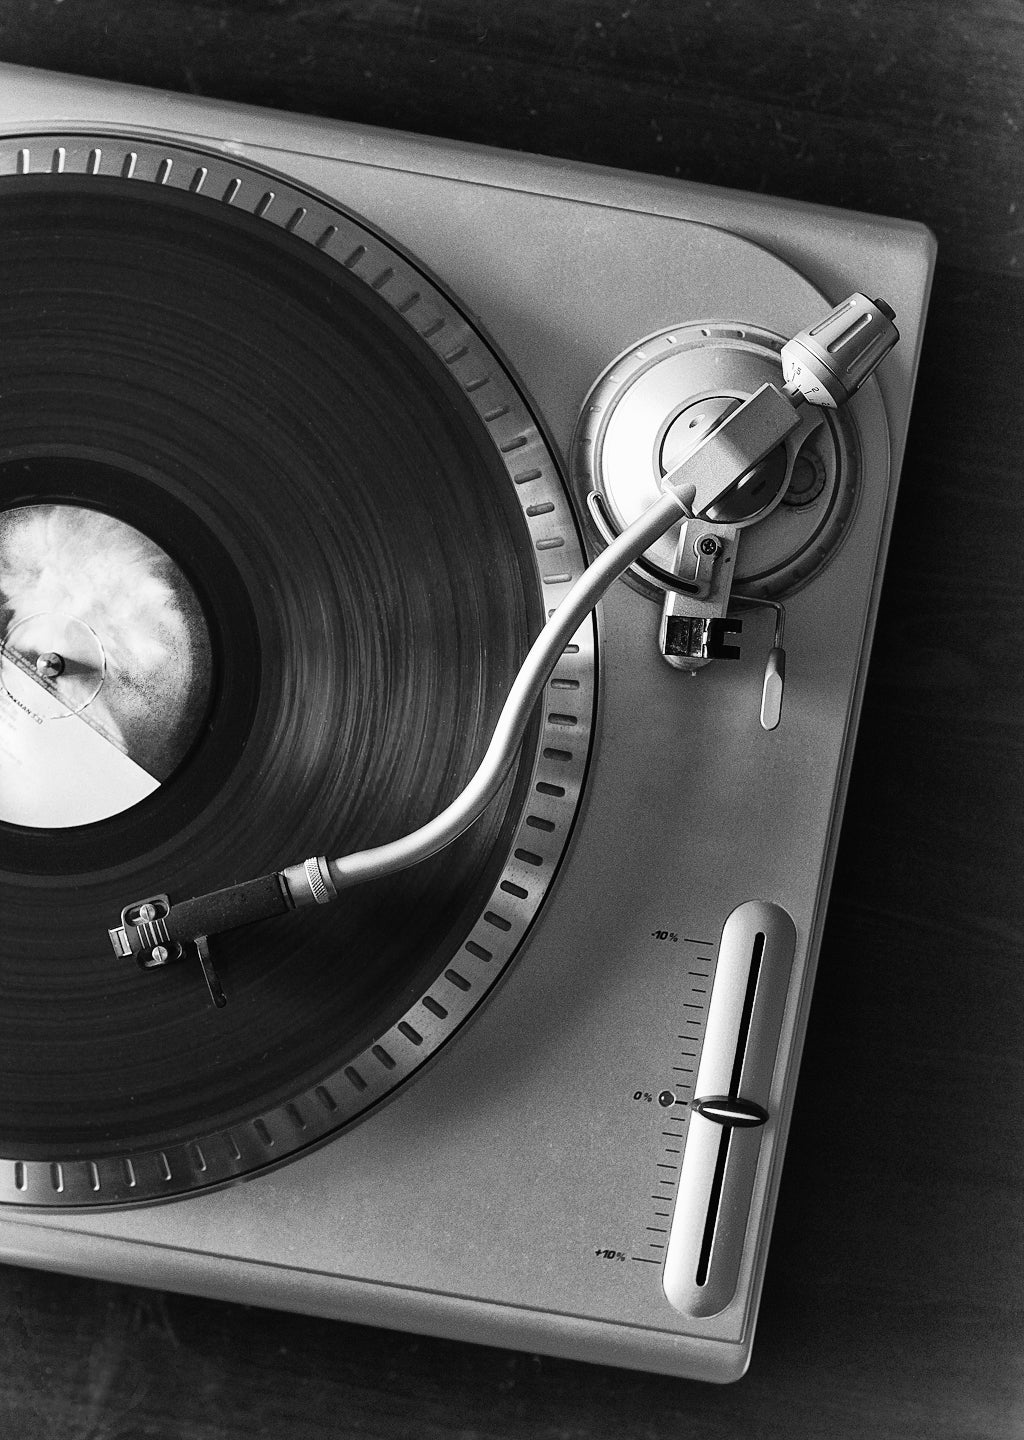 How to Explore and Shop for Vinyl Records Online